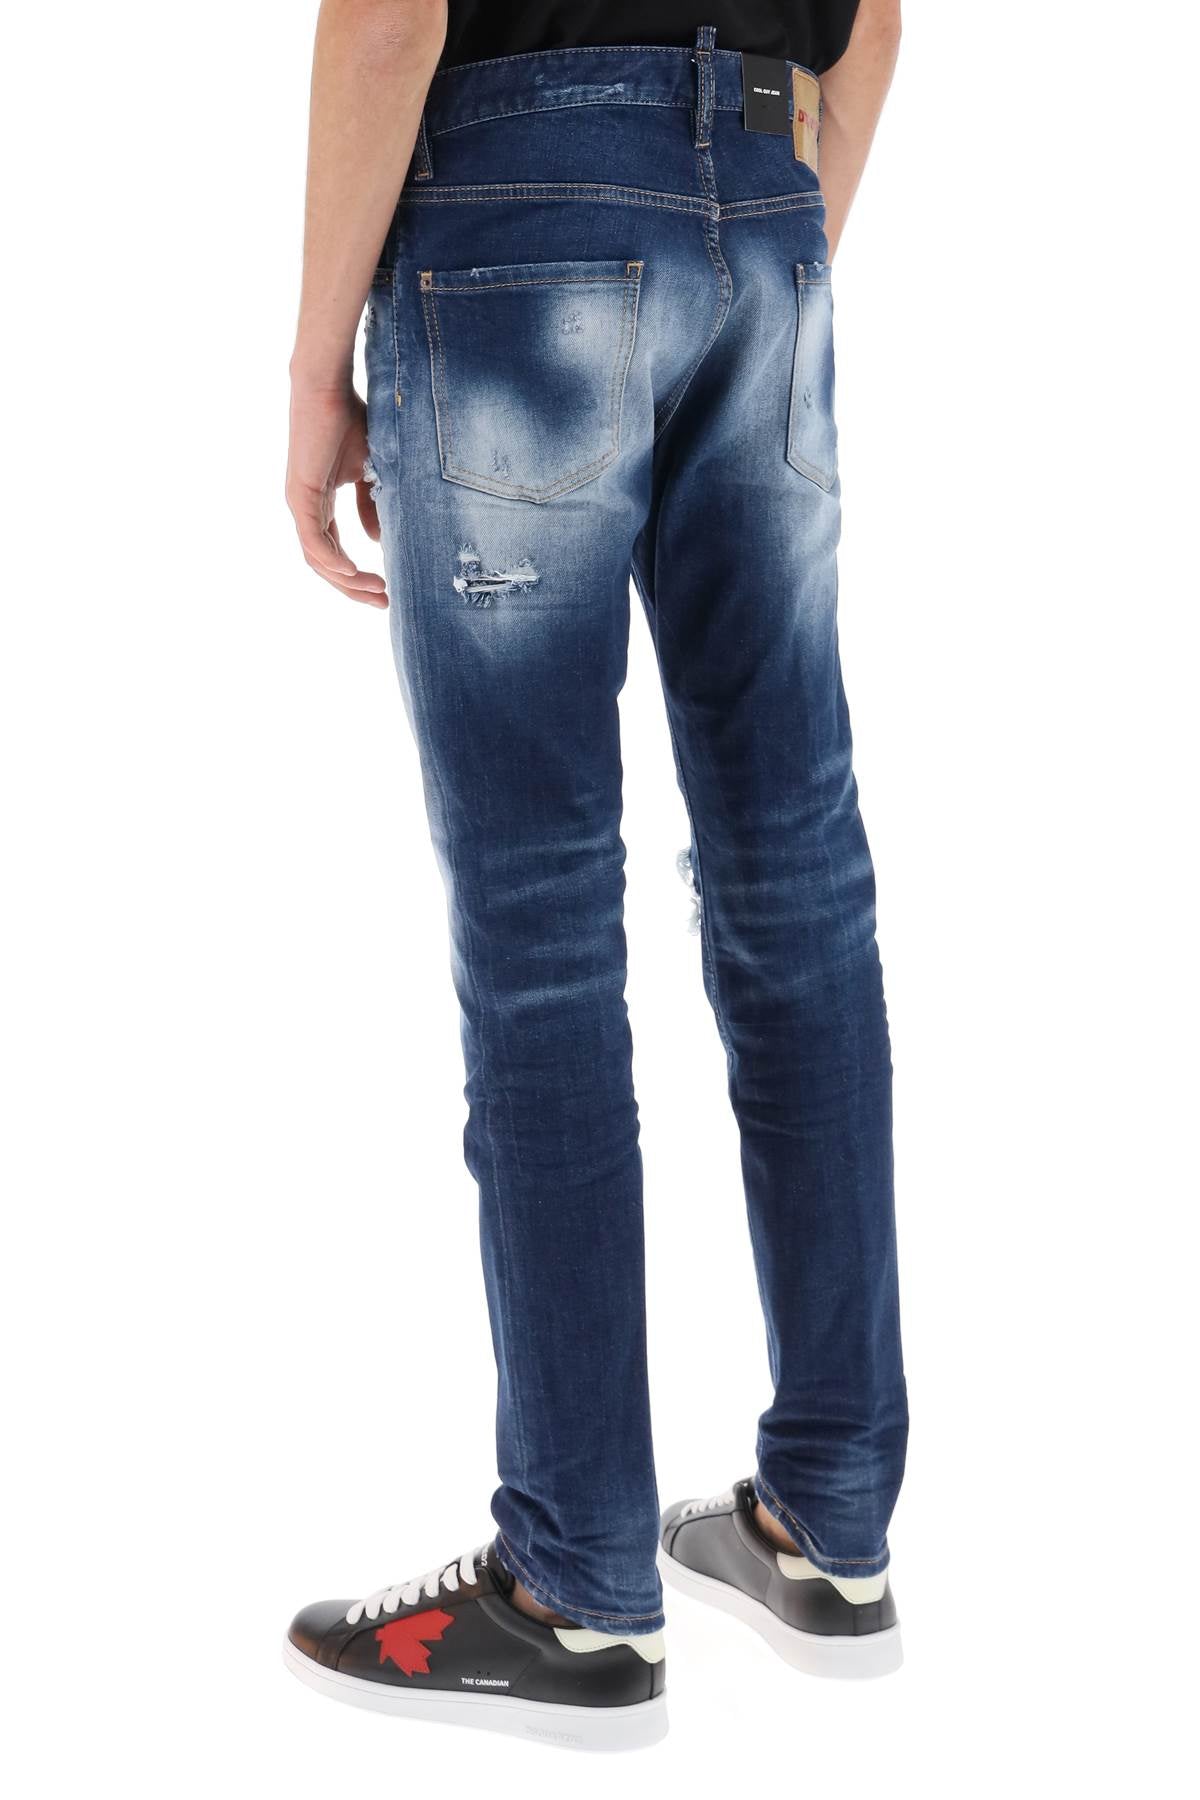 Dsquared2 Dsquared2 cool guy jeans in medium worn out booty wash